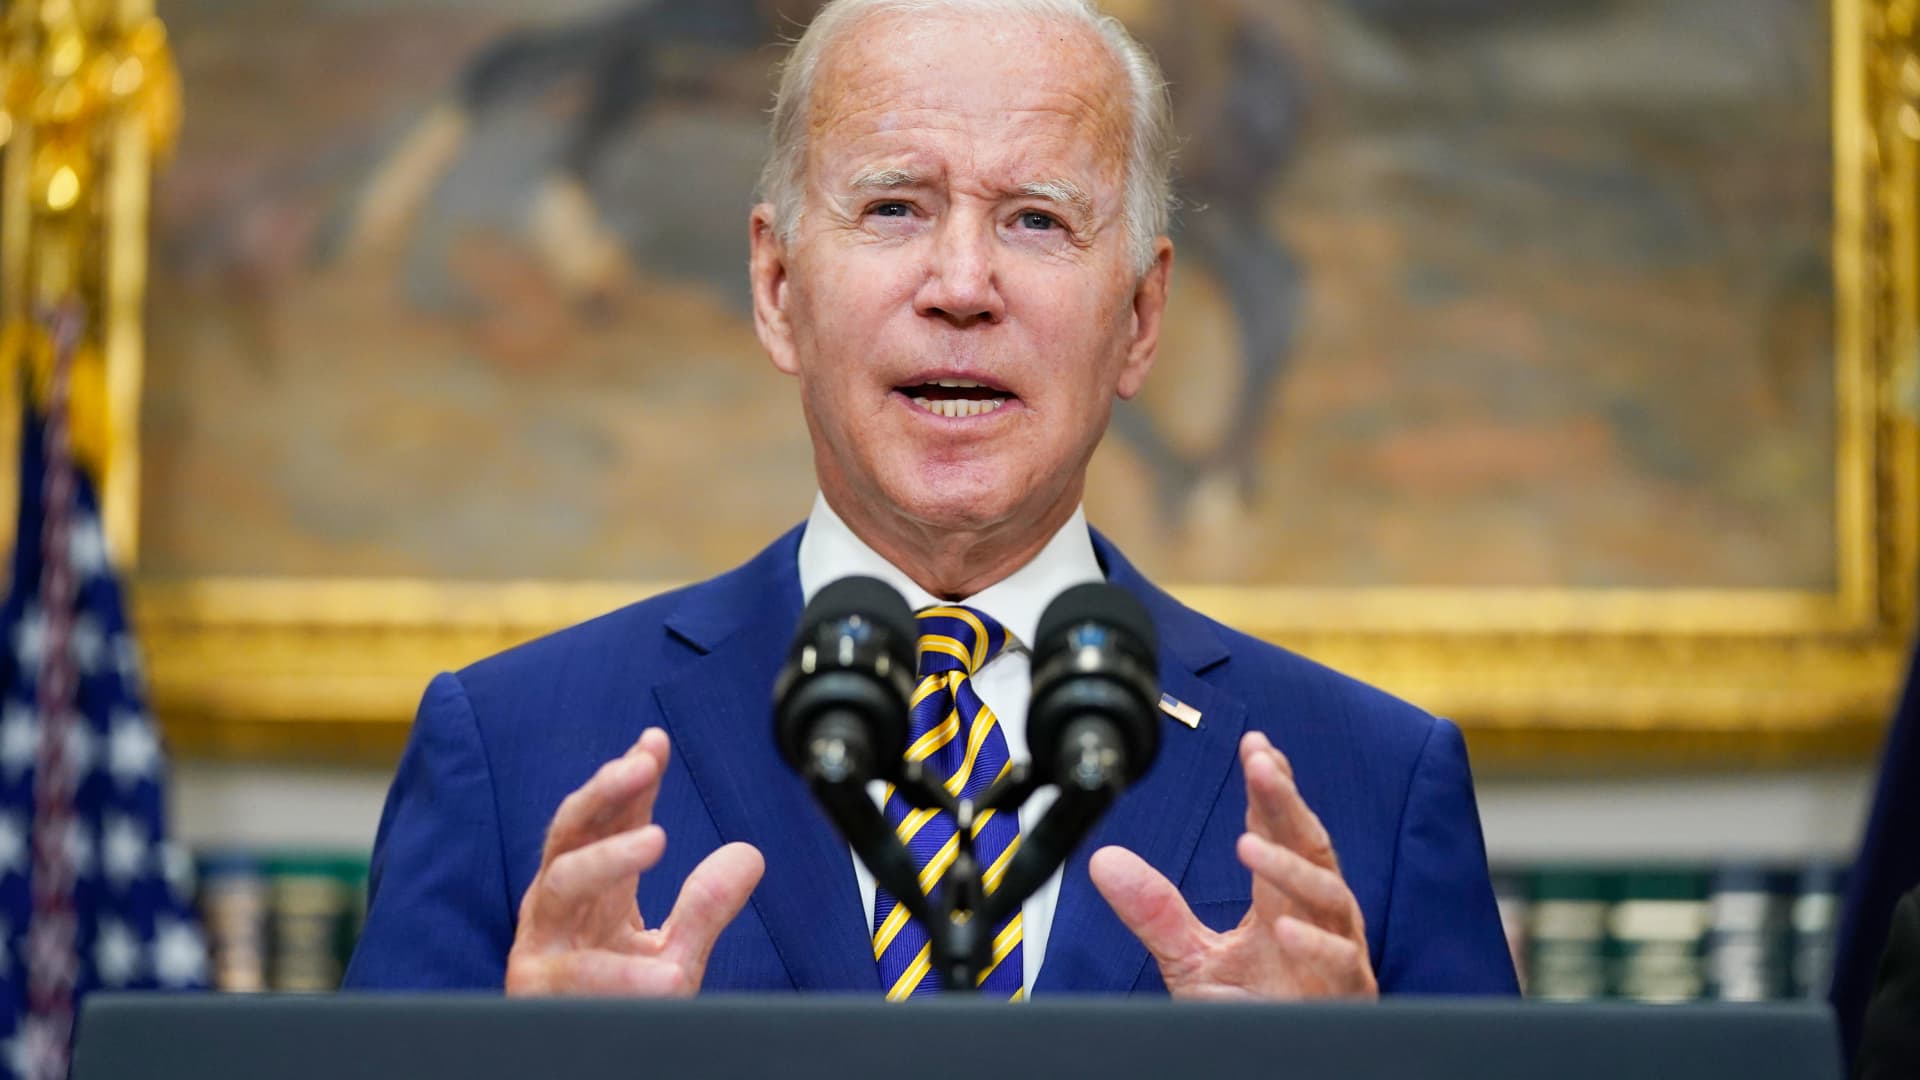 Biden to forgive $7.4 billion in student debt for 277,000 borrowers